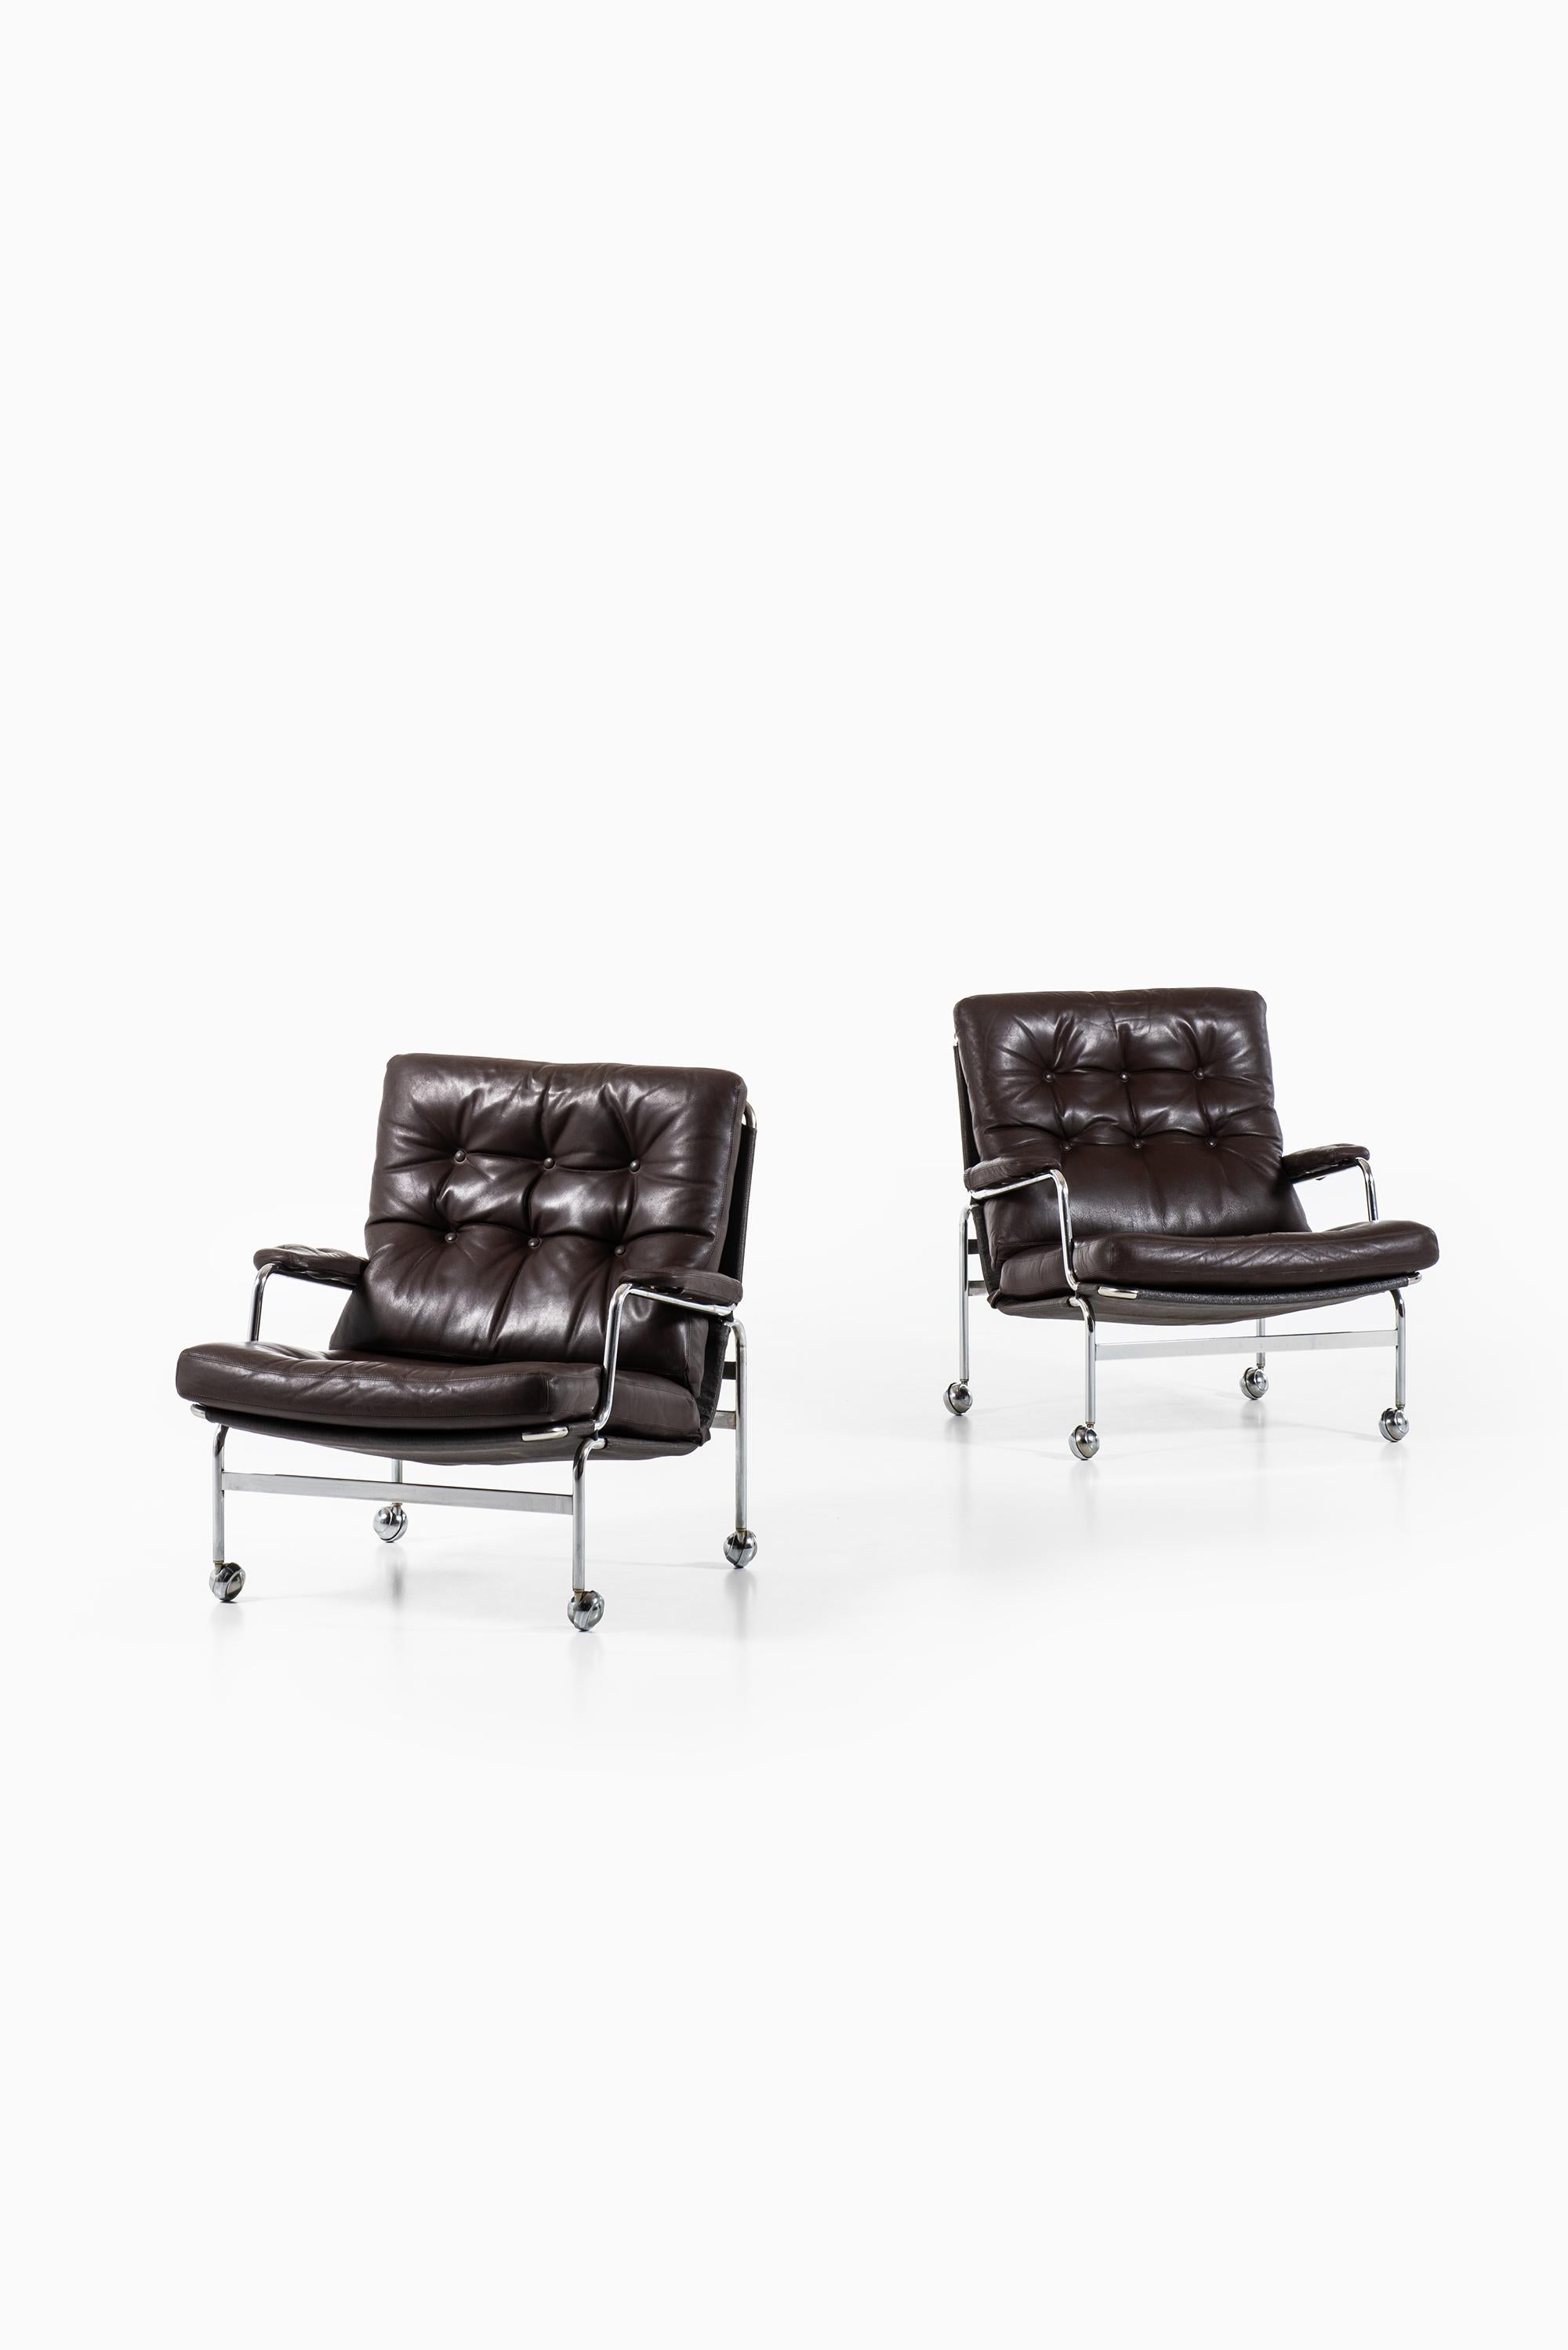 Bruno Mathsson Easy Chairs Model Karin Produced by DUX in Sweden 1